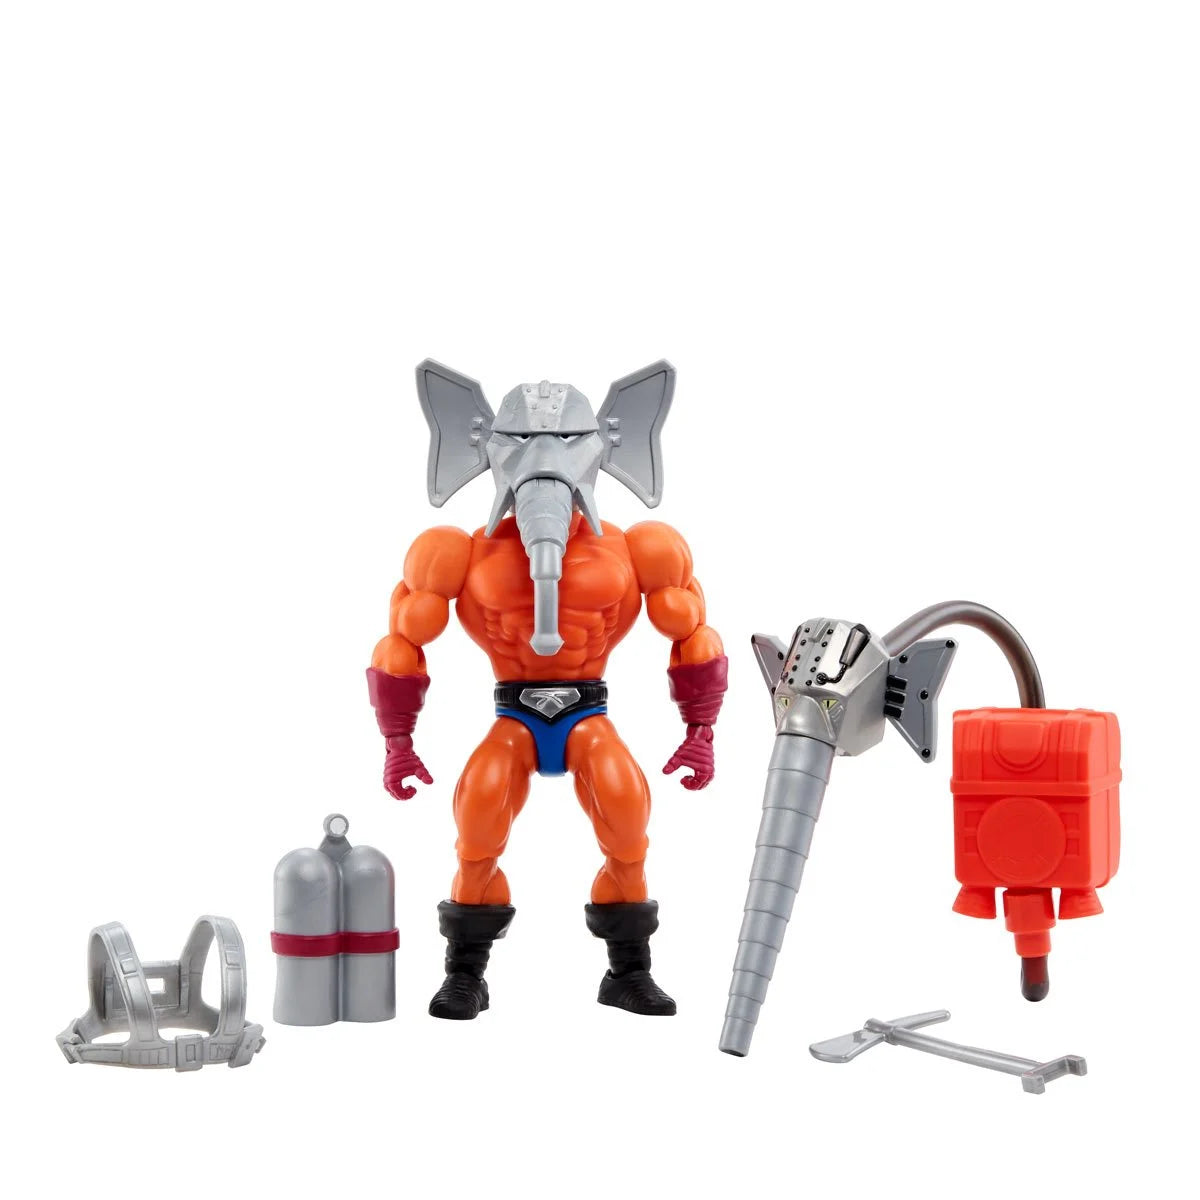 [PREORDER] Masters of the Universe Origins Snout Spout Deluxe Action Figure